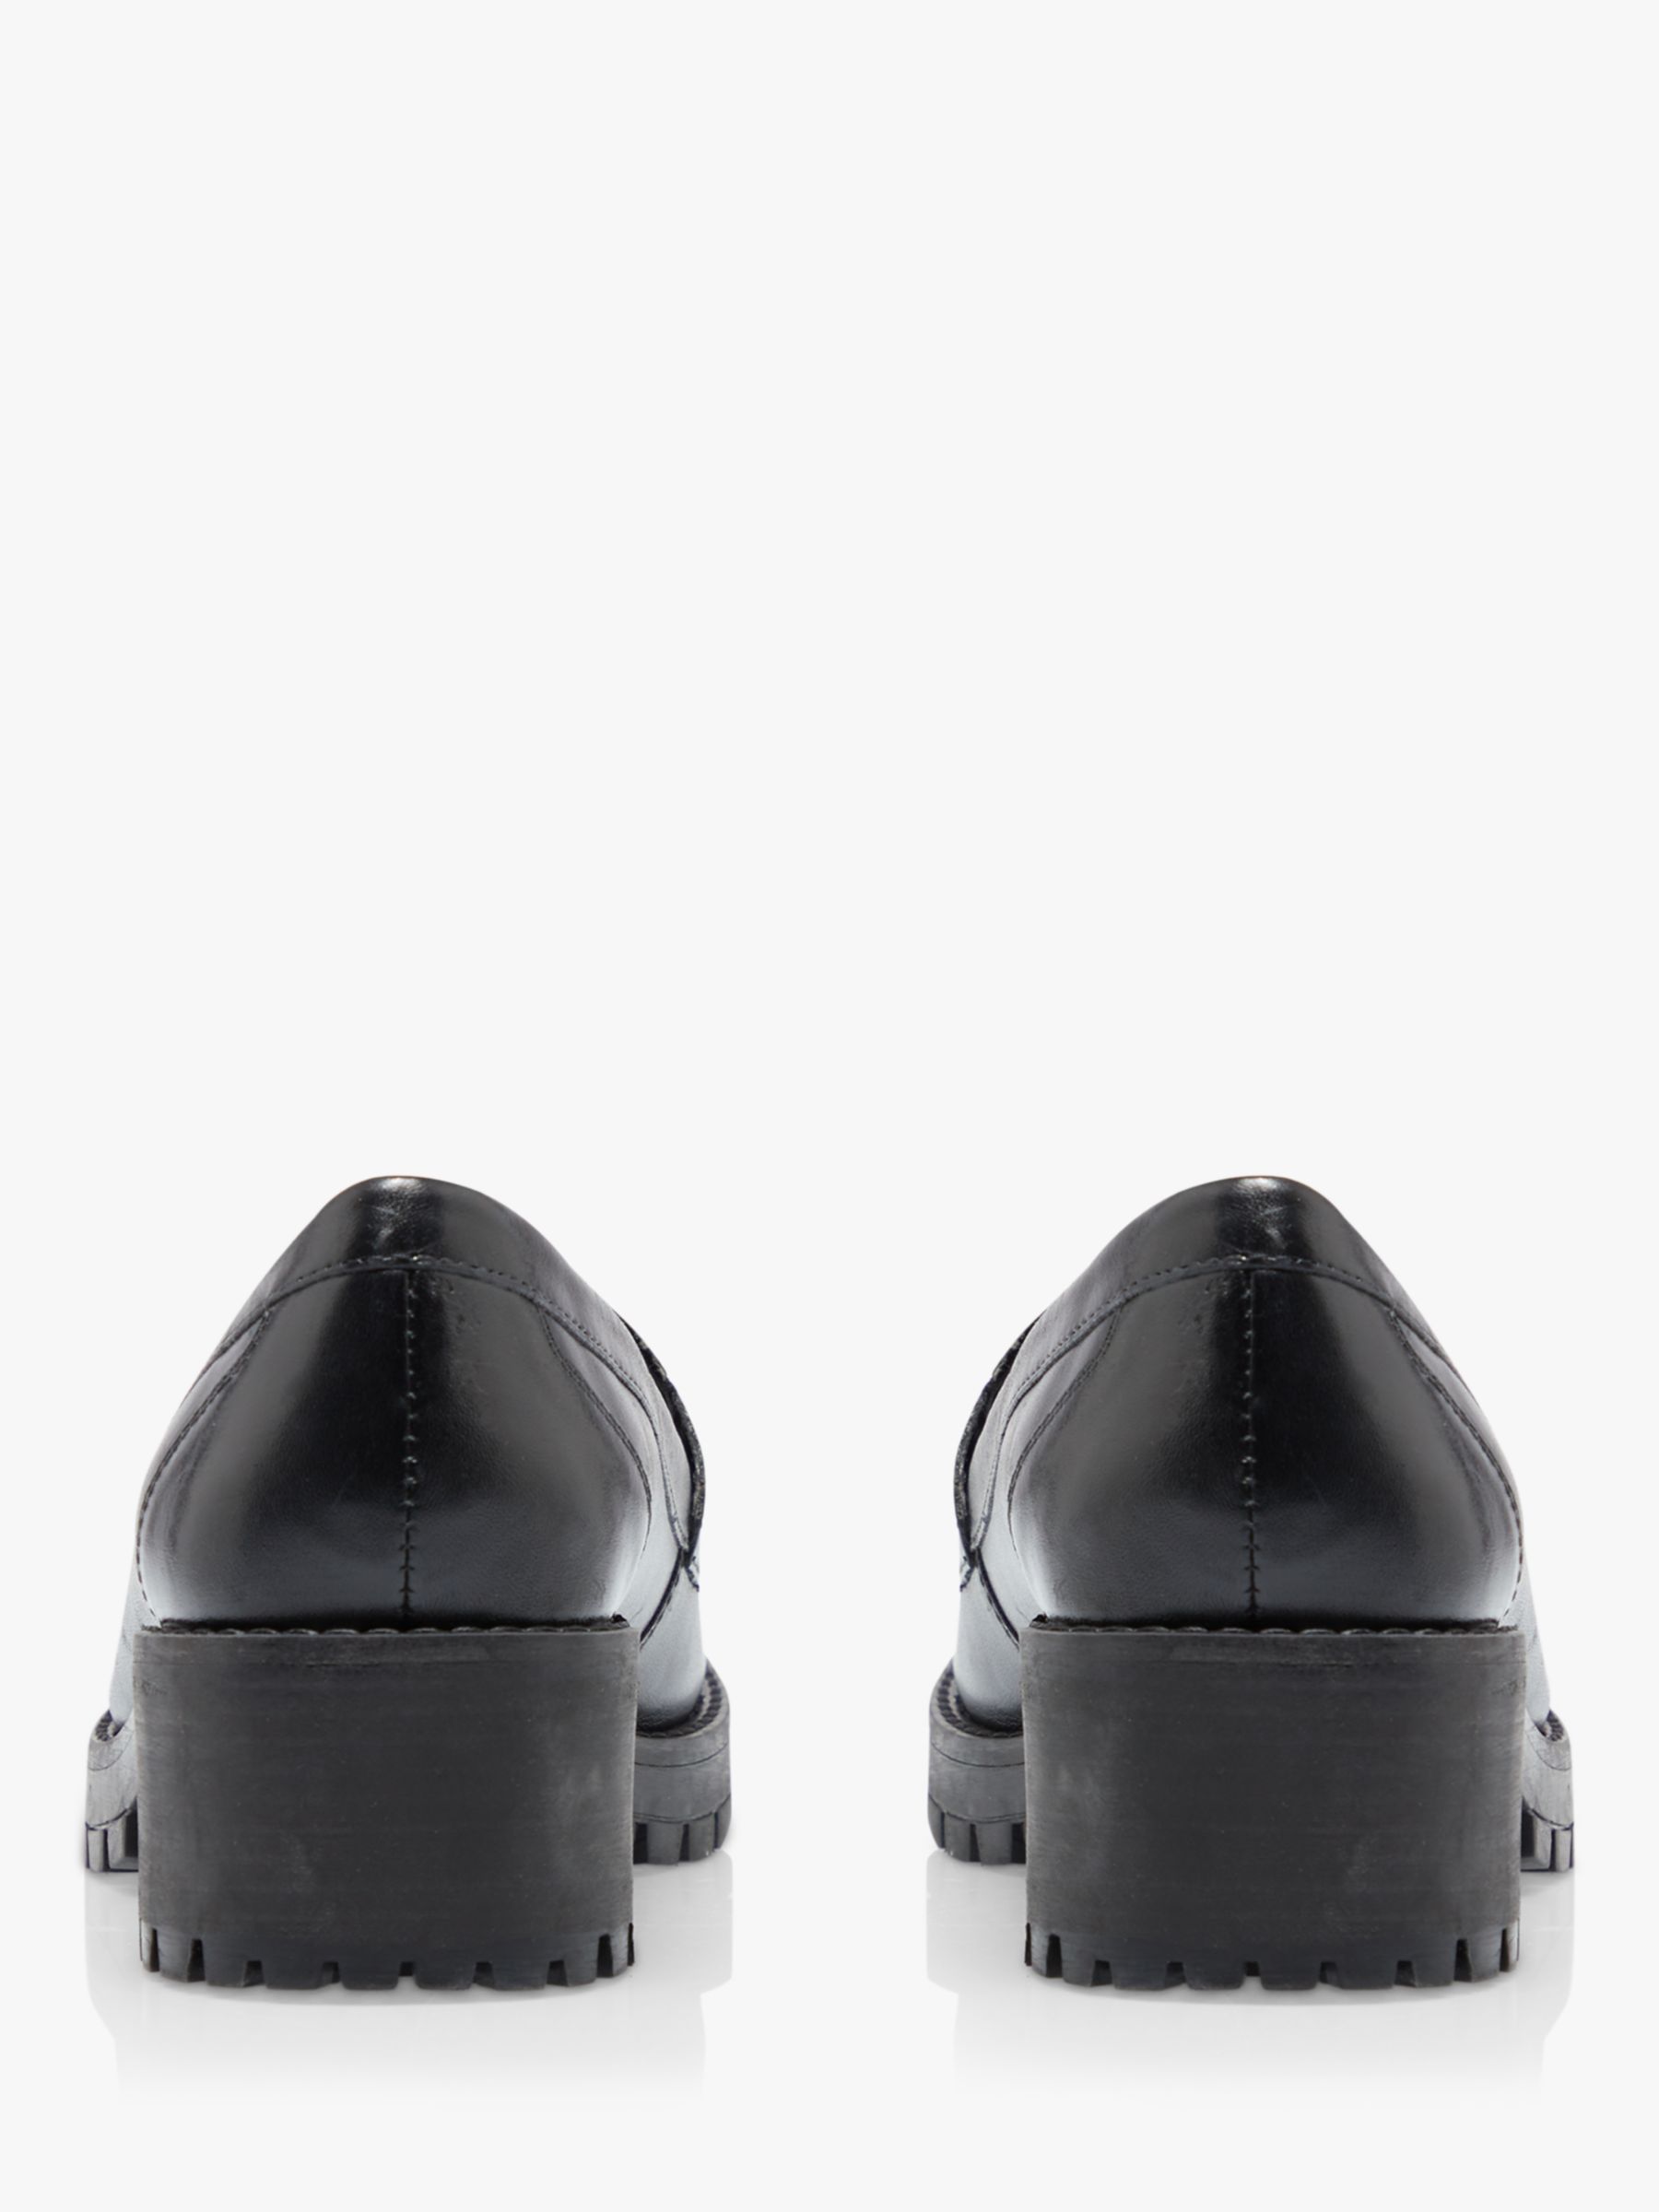 Dune Glintts Leather Loafers, Black